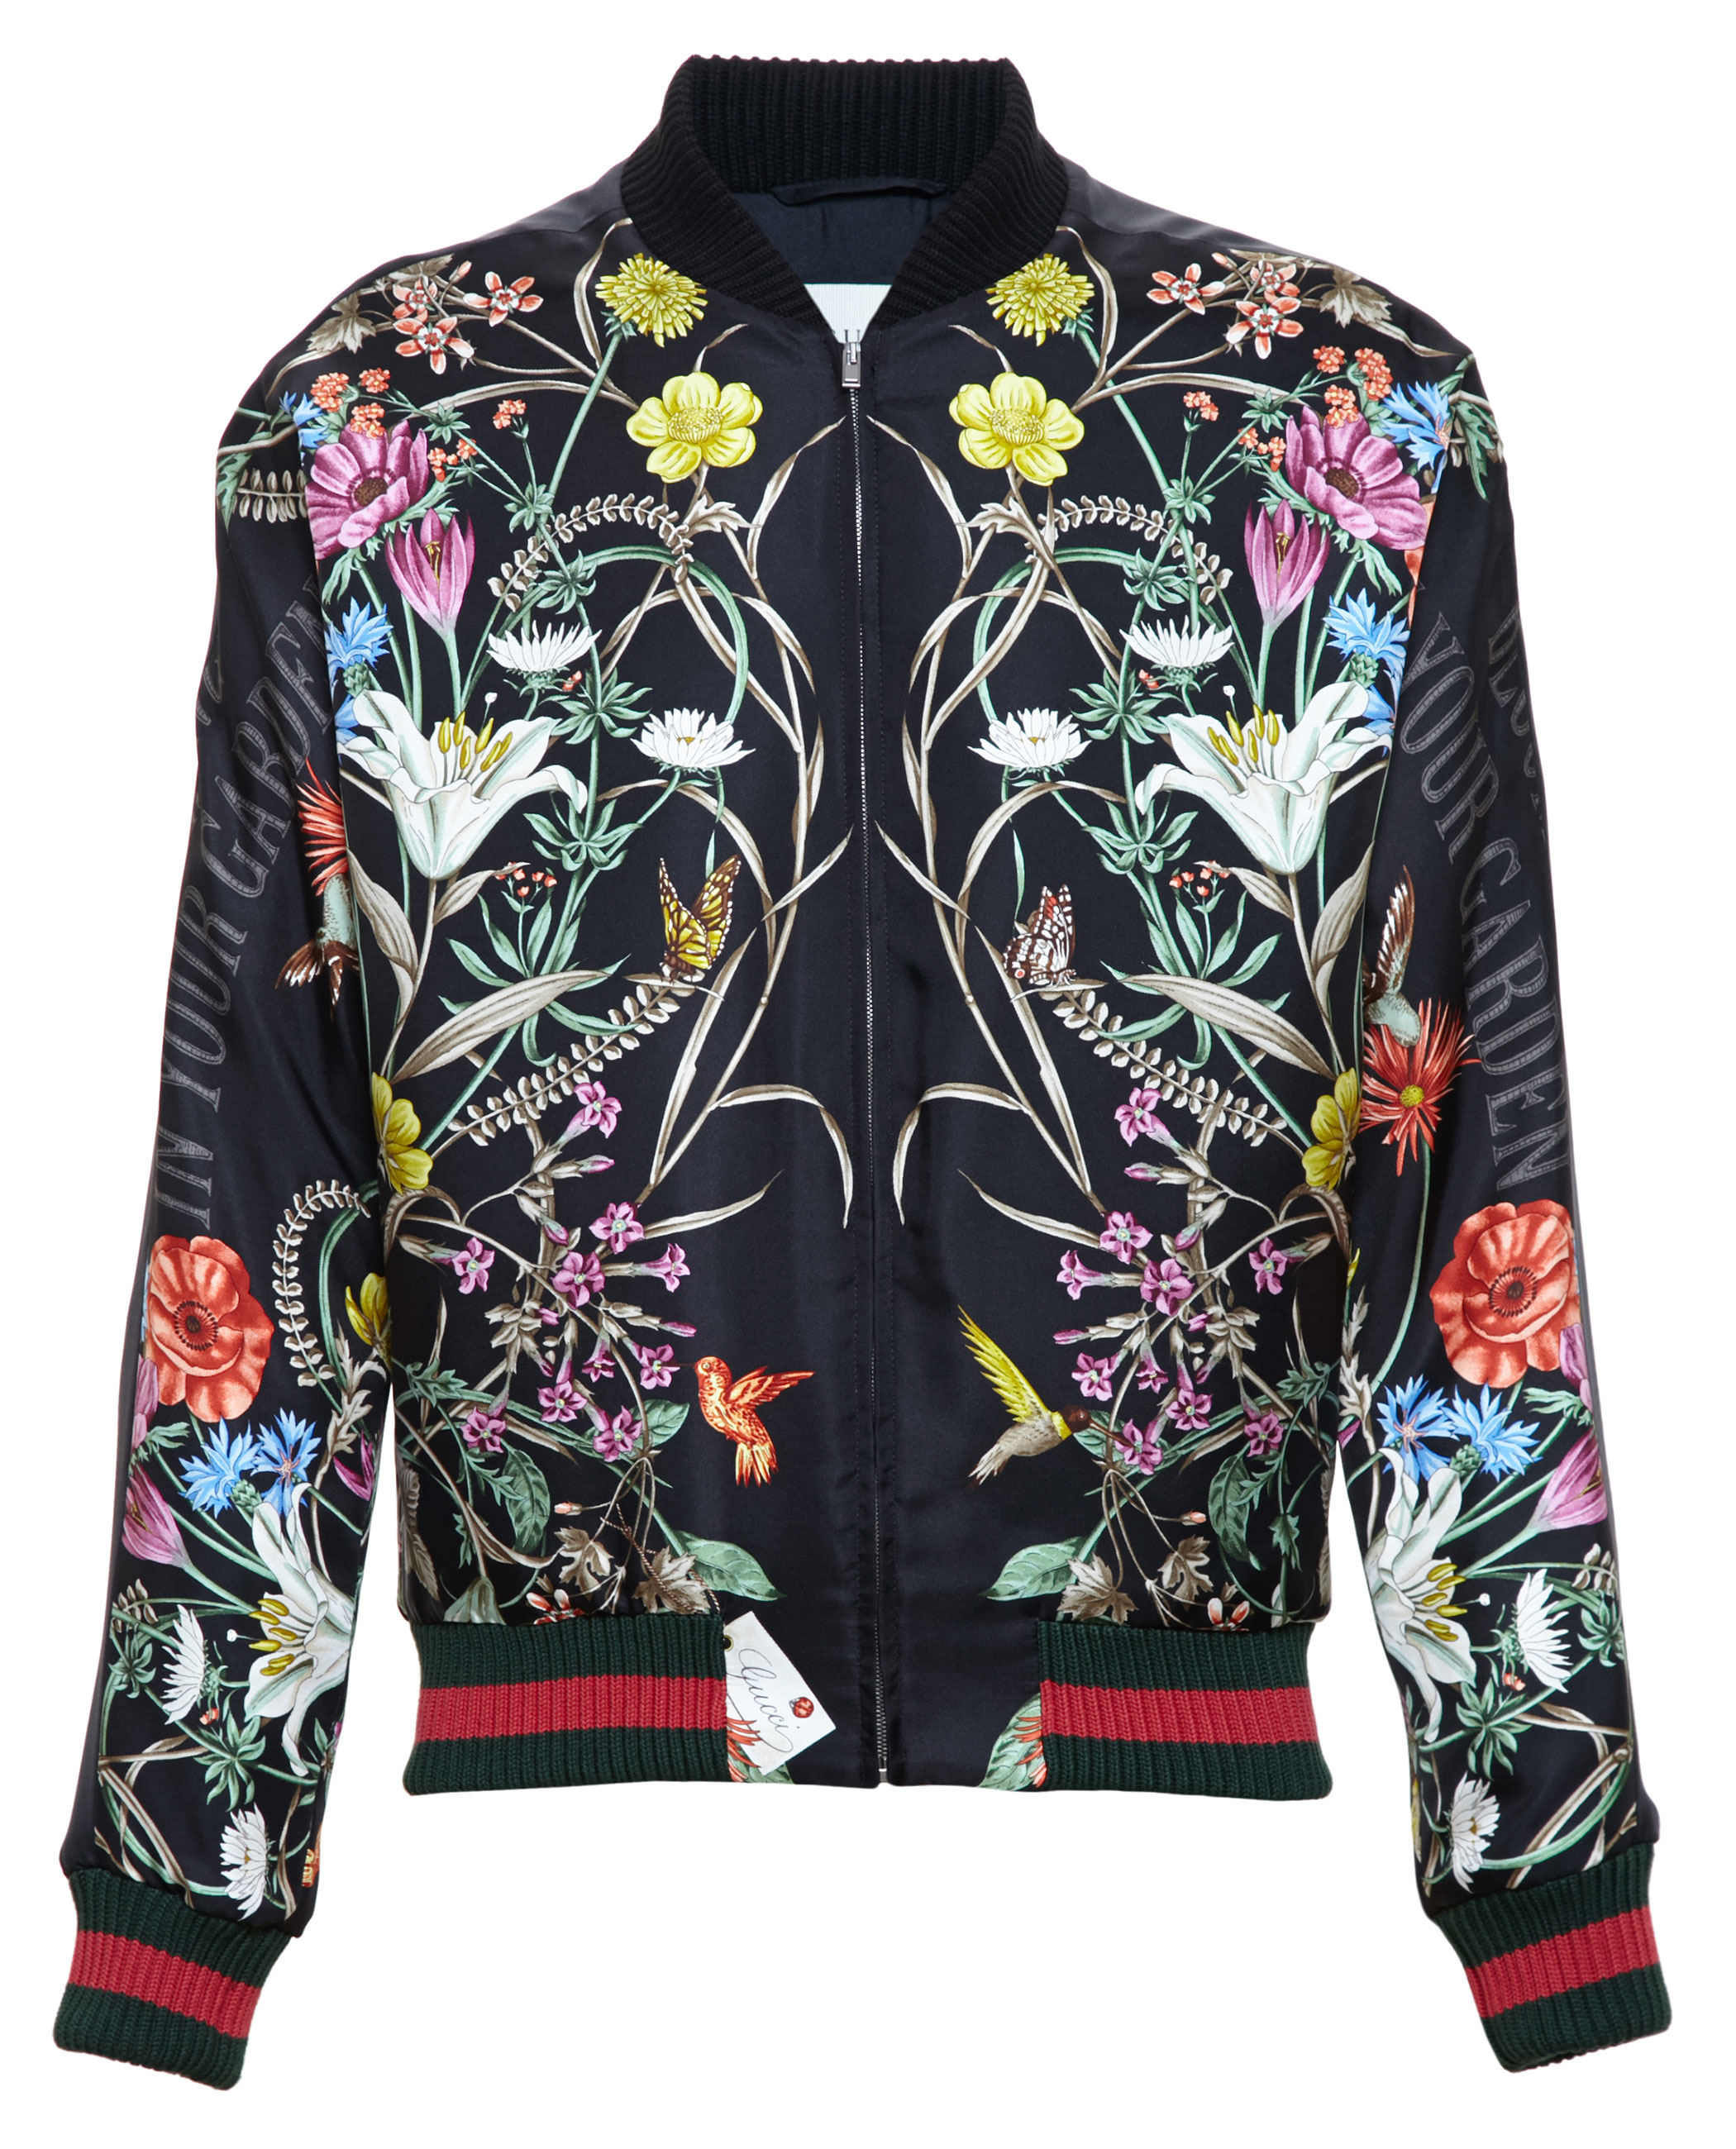 Gucci Floral-print Embroidered Silk Bomber Jacket in Black | Lyst